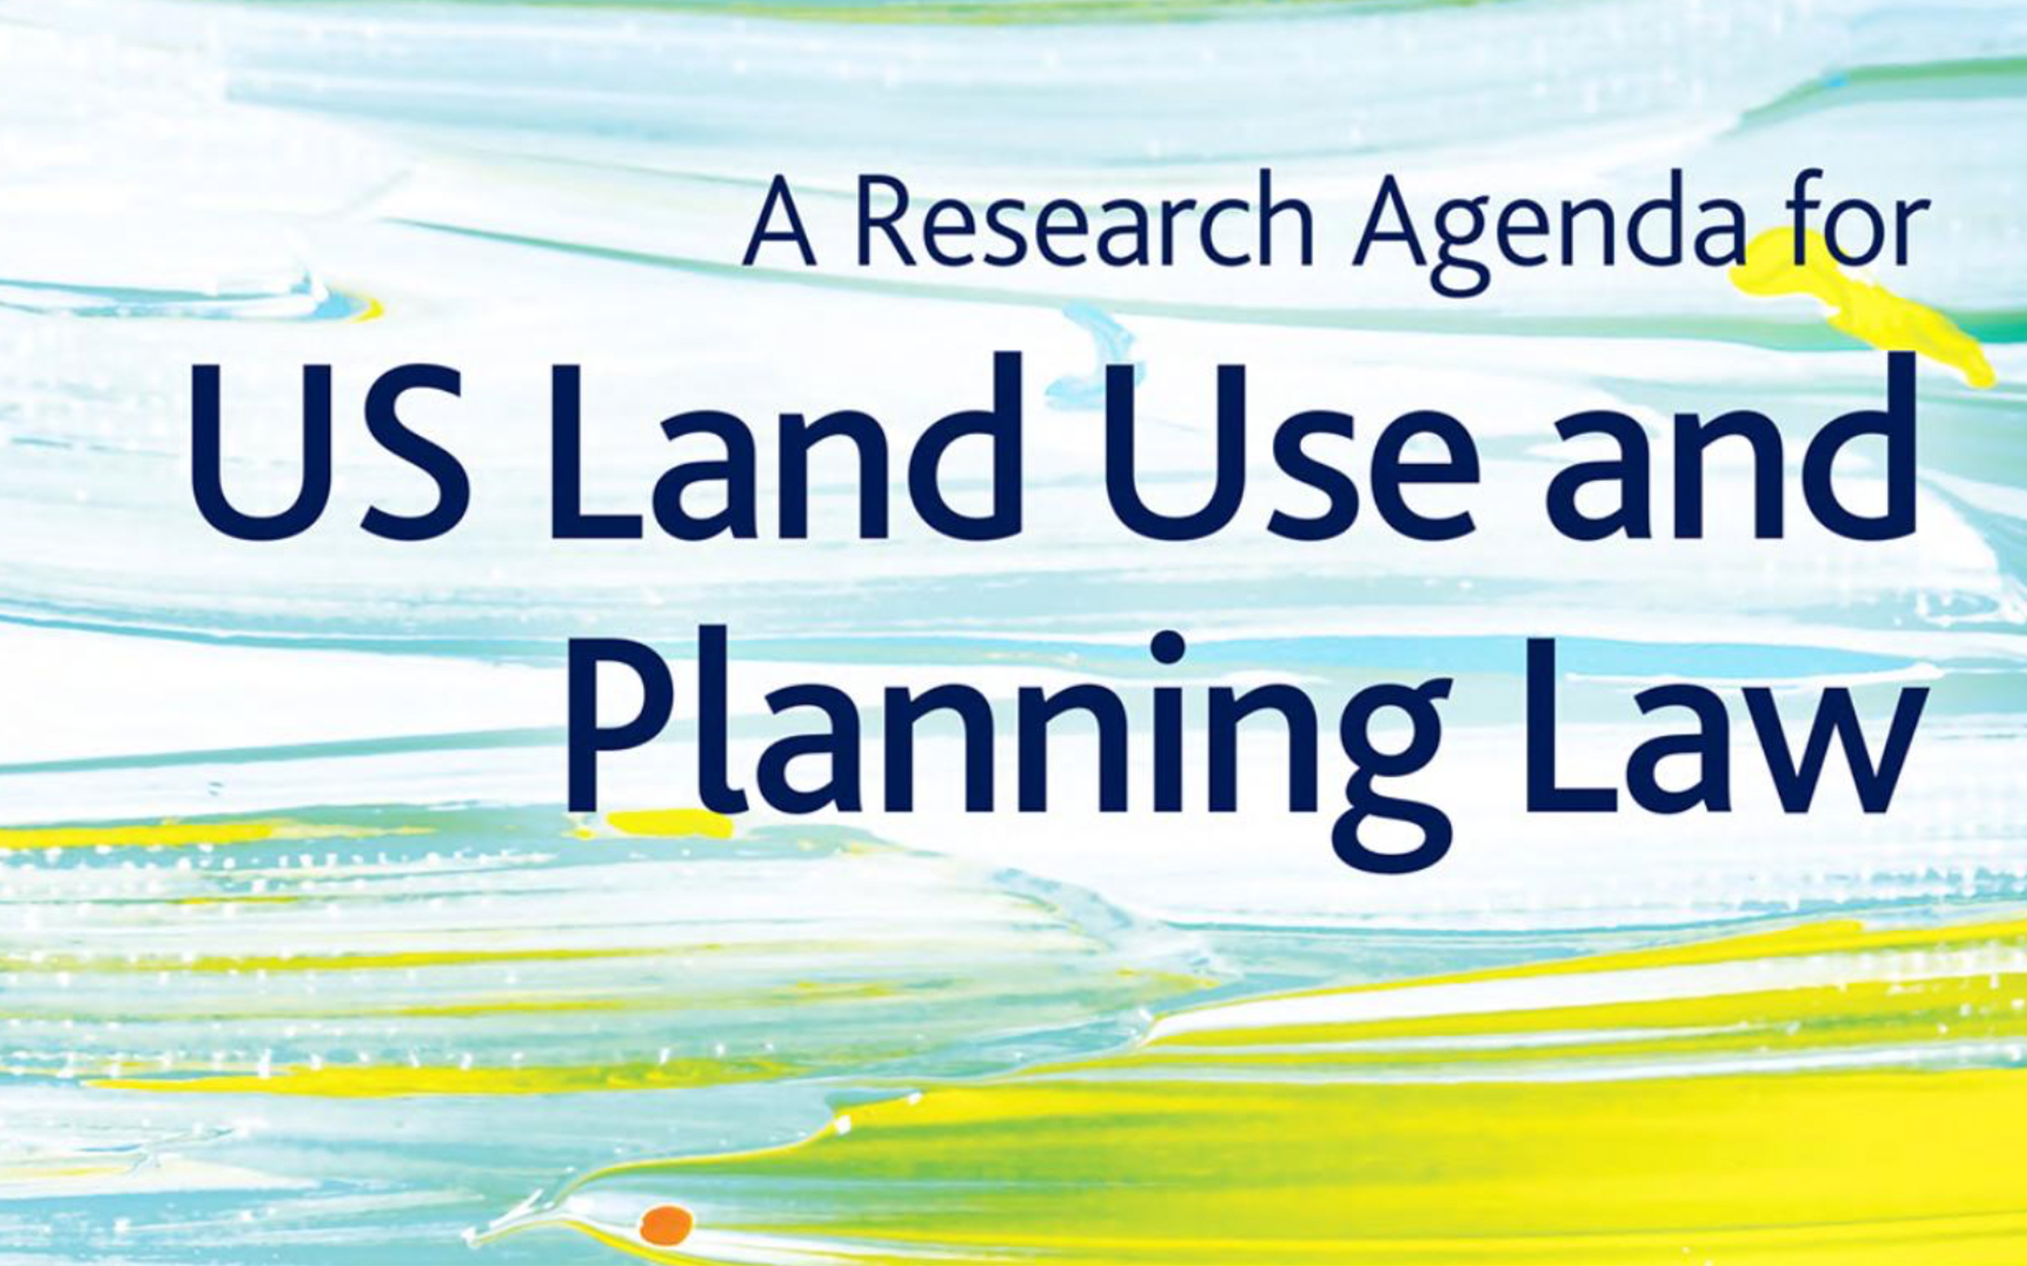 A Research Agenda for US Land Use and Planning Law book title